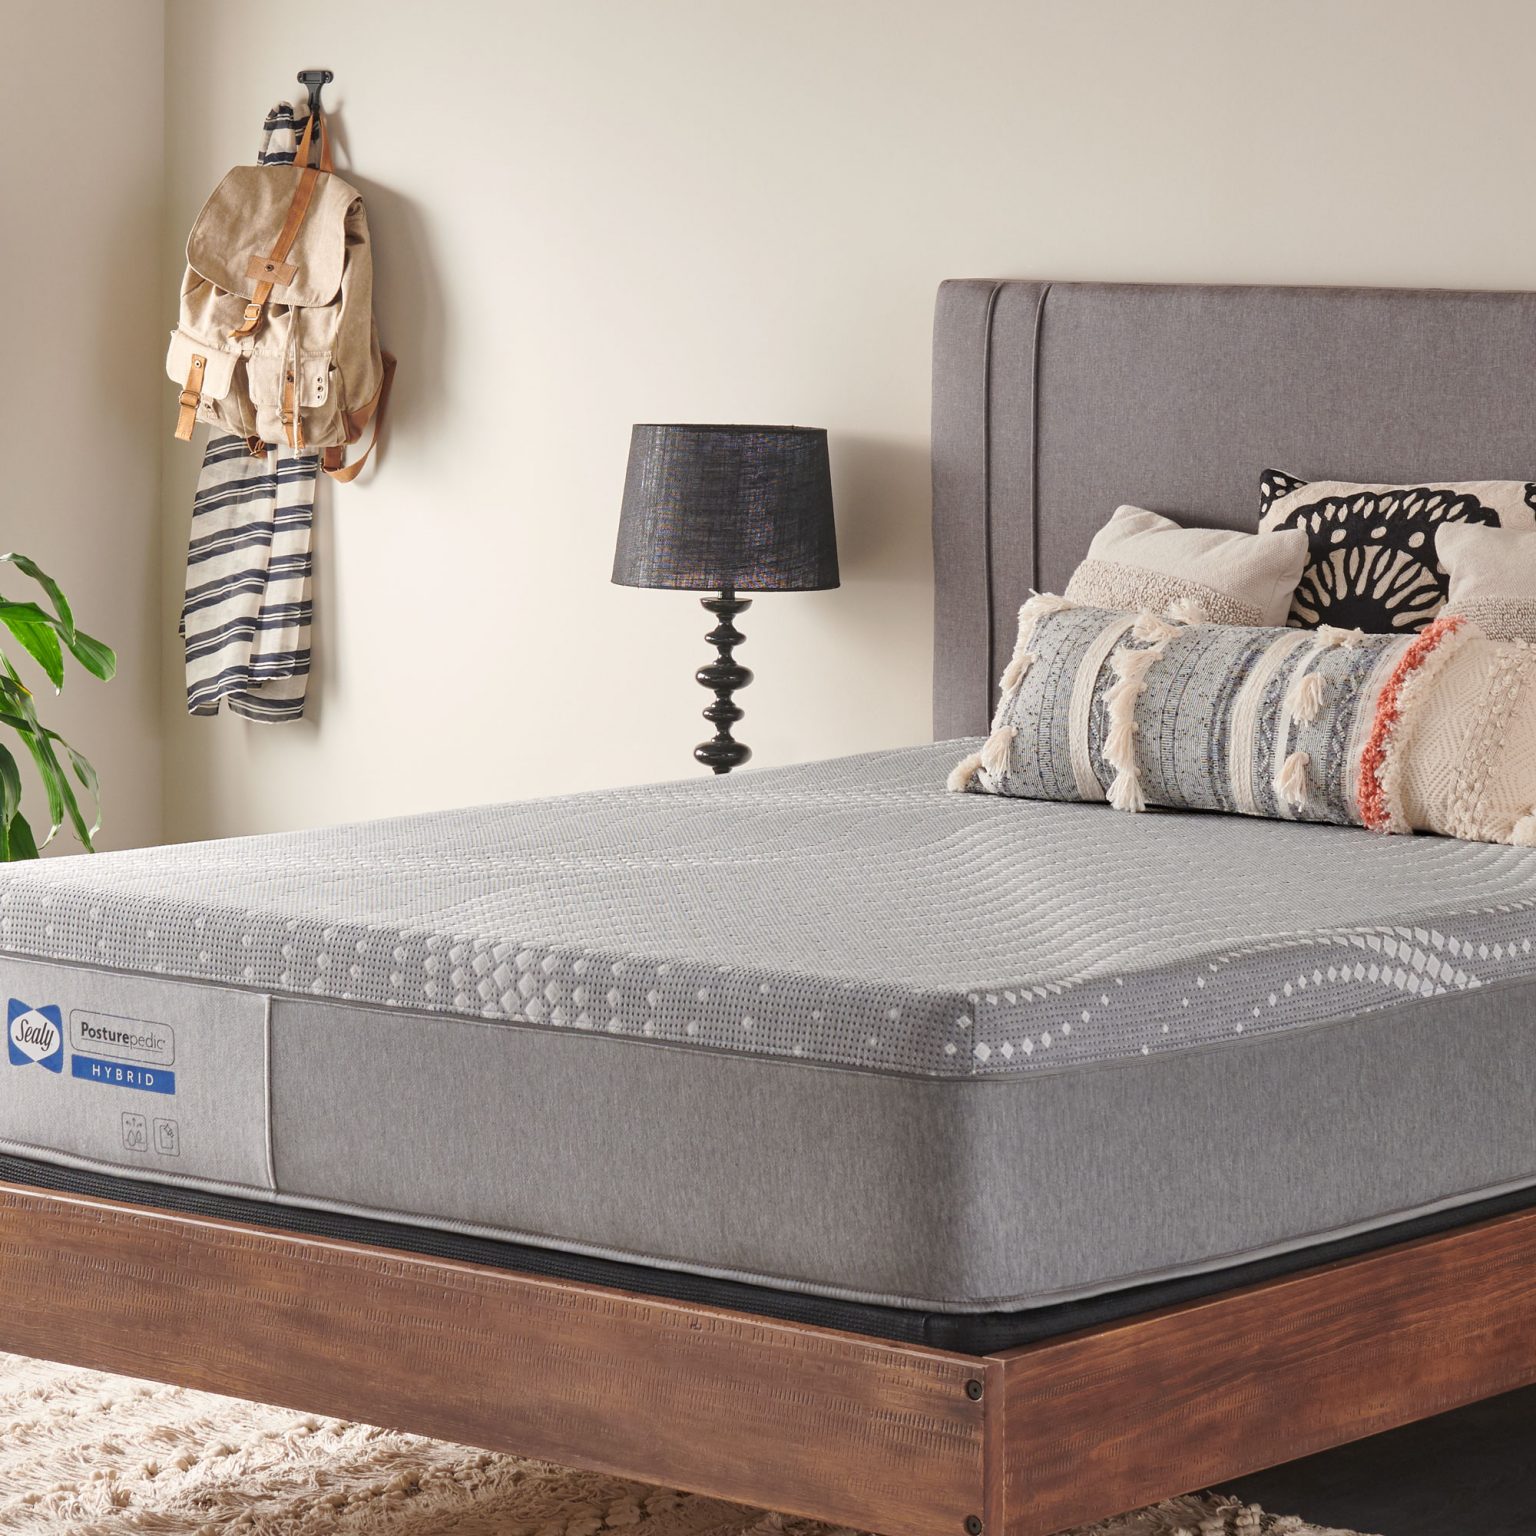 Best of Sealy Mattresses For Side Sleepers Best Mattress